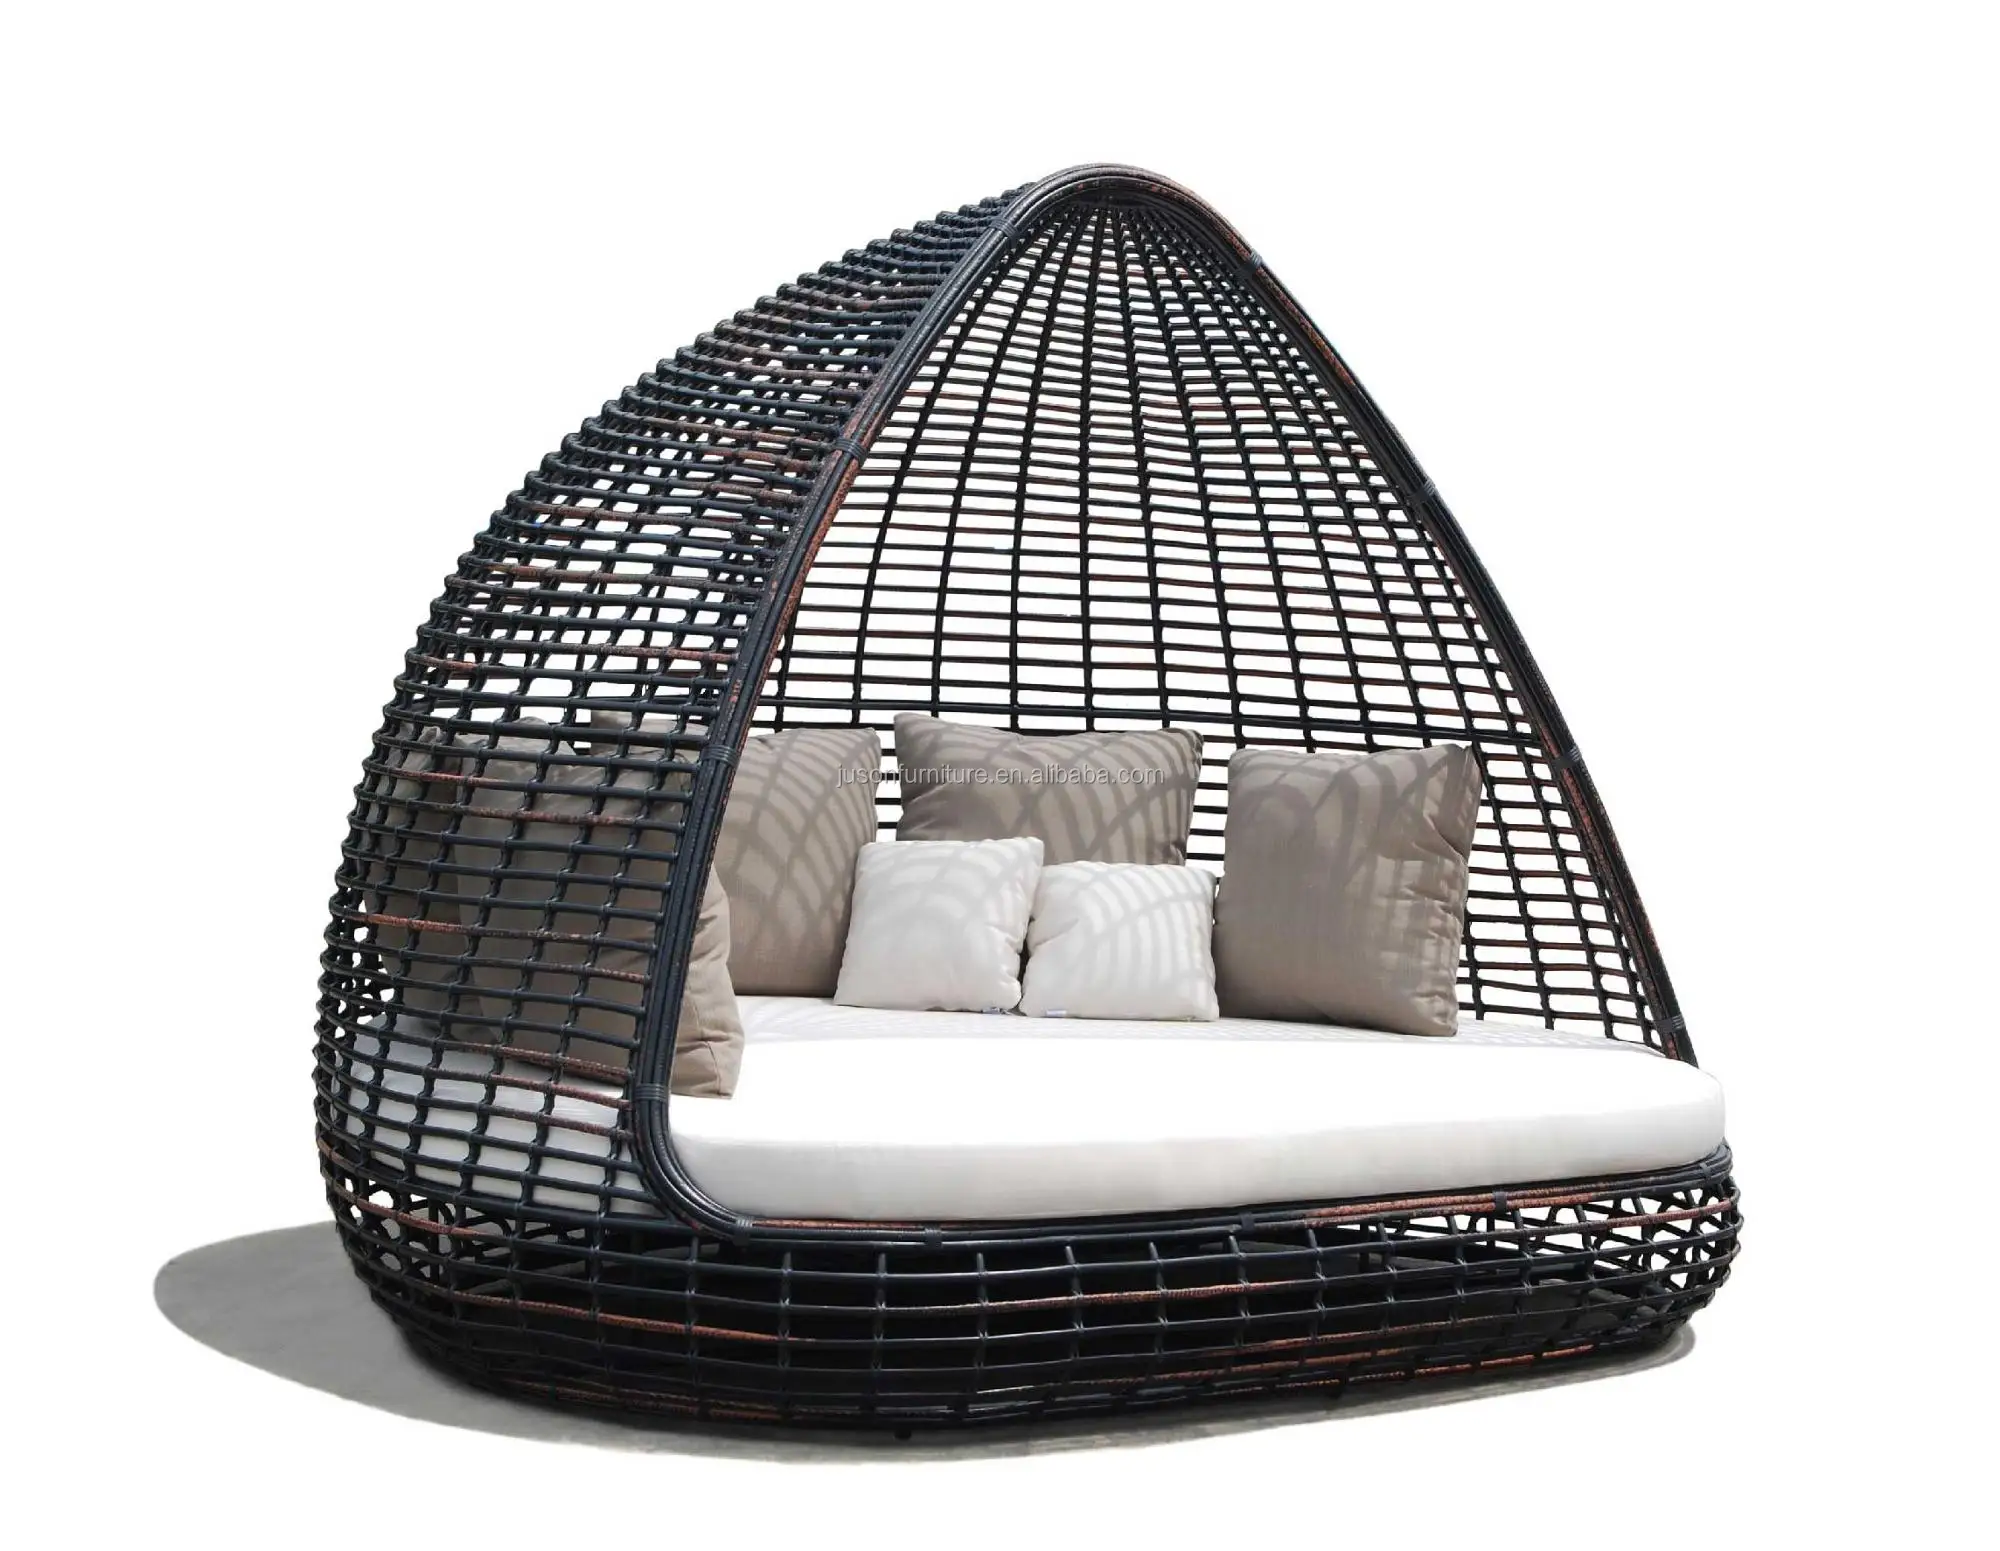 Home Patio Beach Thick Rattan Material Pyamidal Cocoon Shaped Chair Outdoor Wicker Daybed Buy Home Patio Beach Thick Rattan Material Pyamidal Cocoon Shaped Chair Outdoor Wicker Daybed